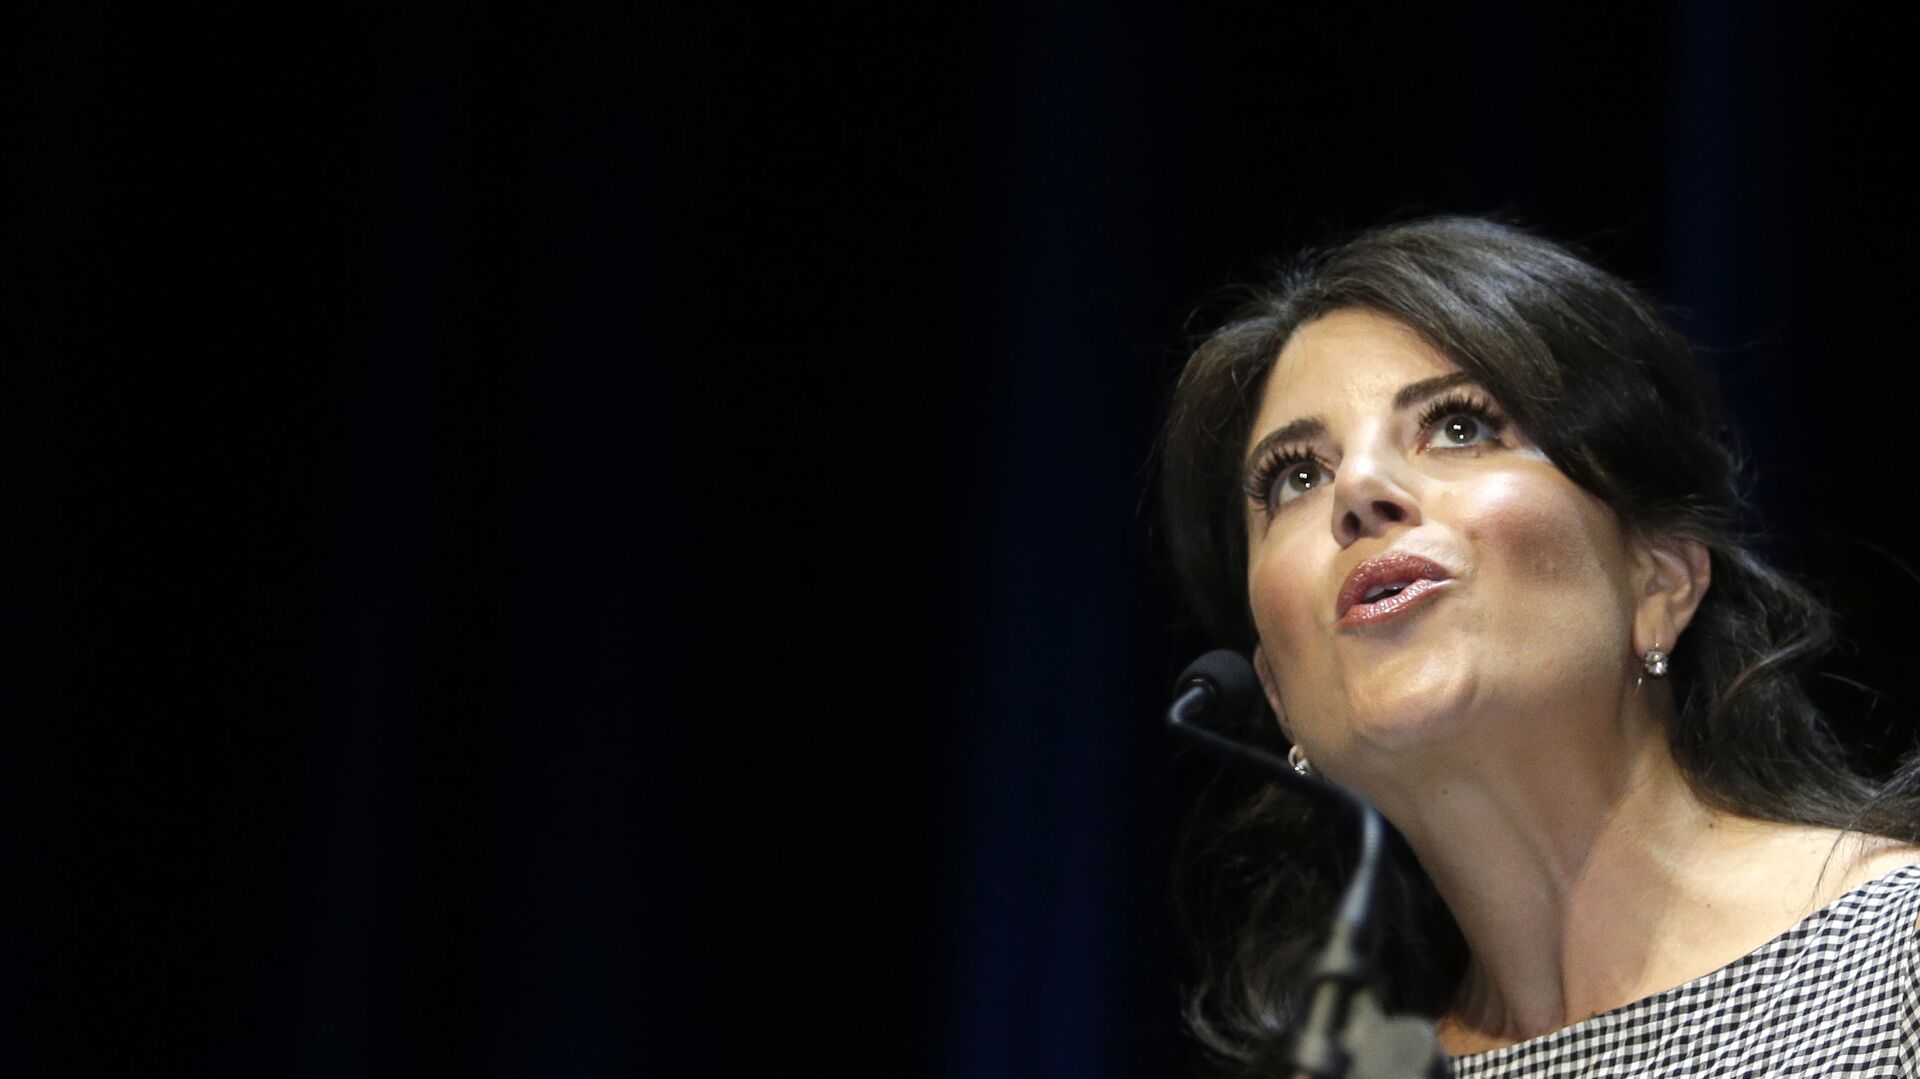 US former White house intern Monica Lewinsky attends at the Cannes Lions 2015, International Advertising Festival in Cannes, southern France, Thursday, June 25, 2015 - Sputnik International, 1920, 27.08.2021